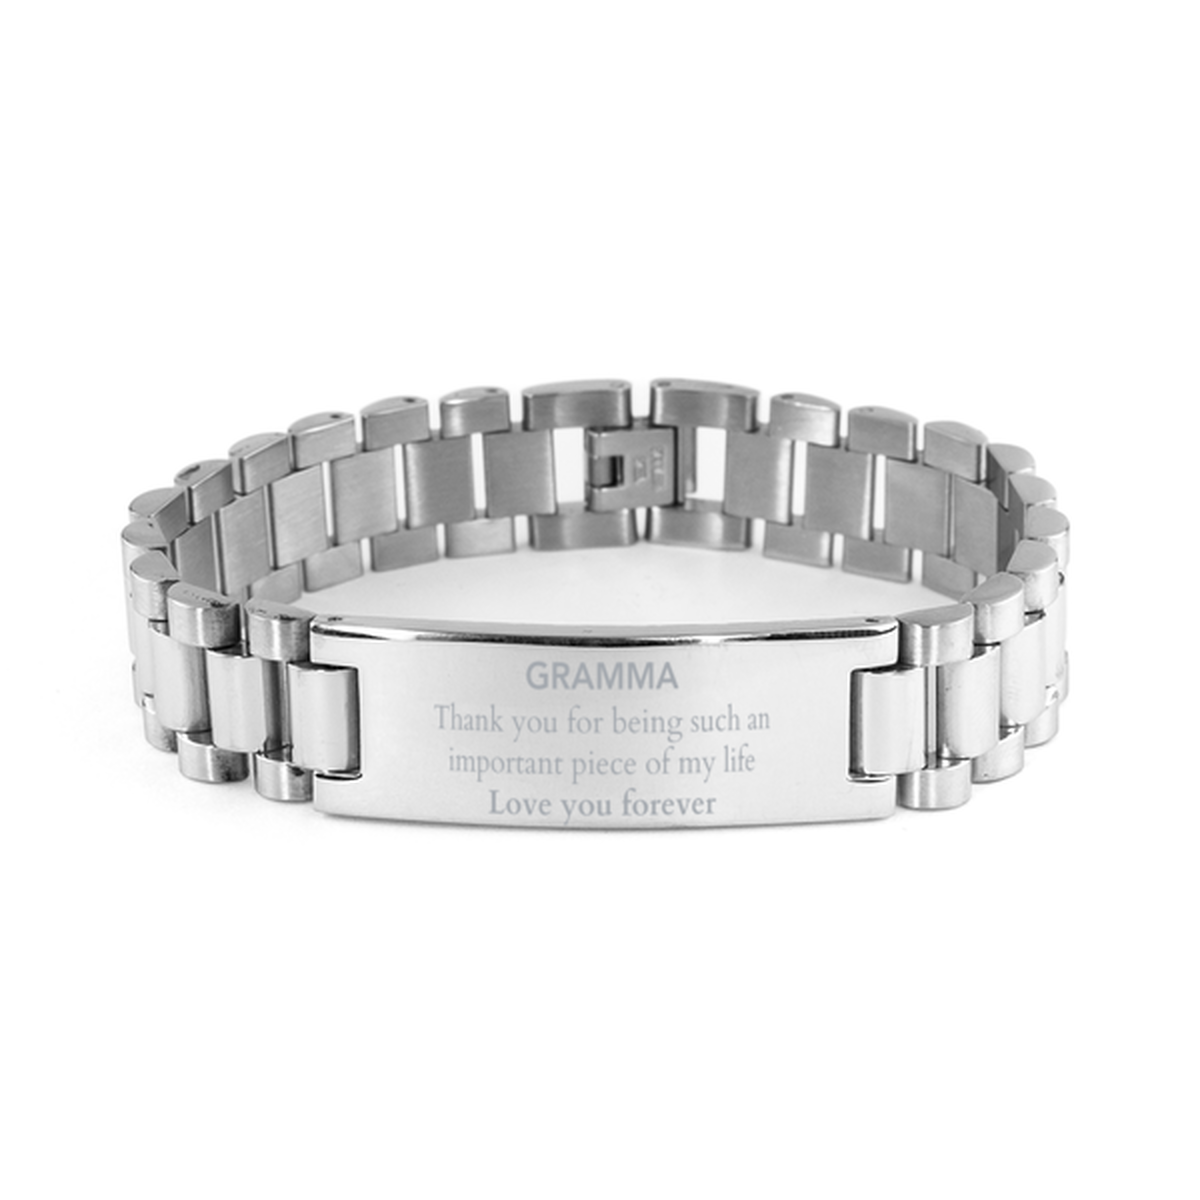 Appropriate Gramma Ladder Stainless Steel Bracelet Epic Birthday Gifts for Gramma Thank you for being such an important piece of my life Gramma Christmas Mothers Fathers Day